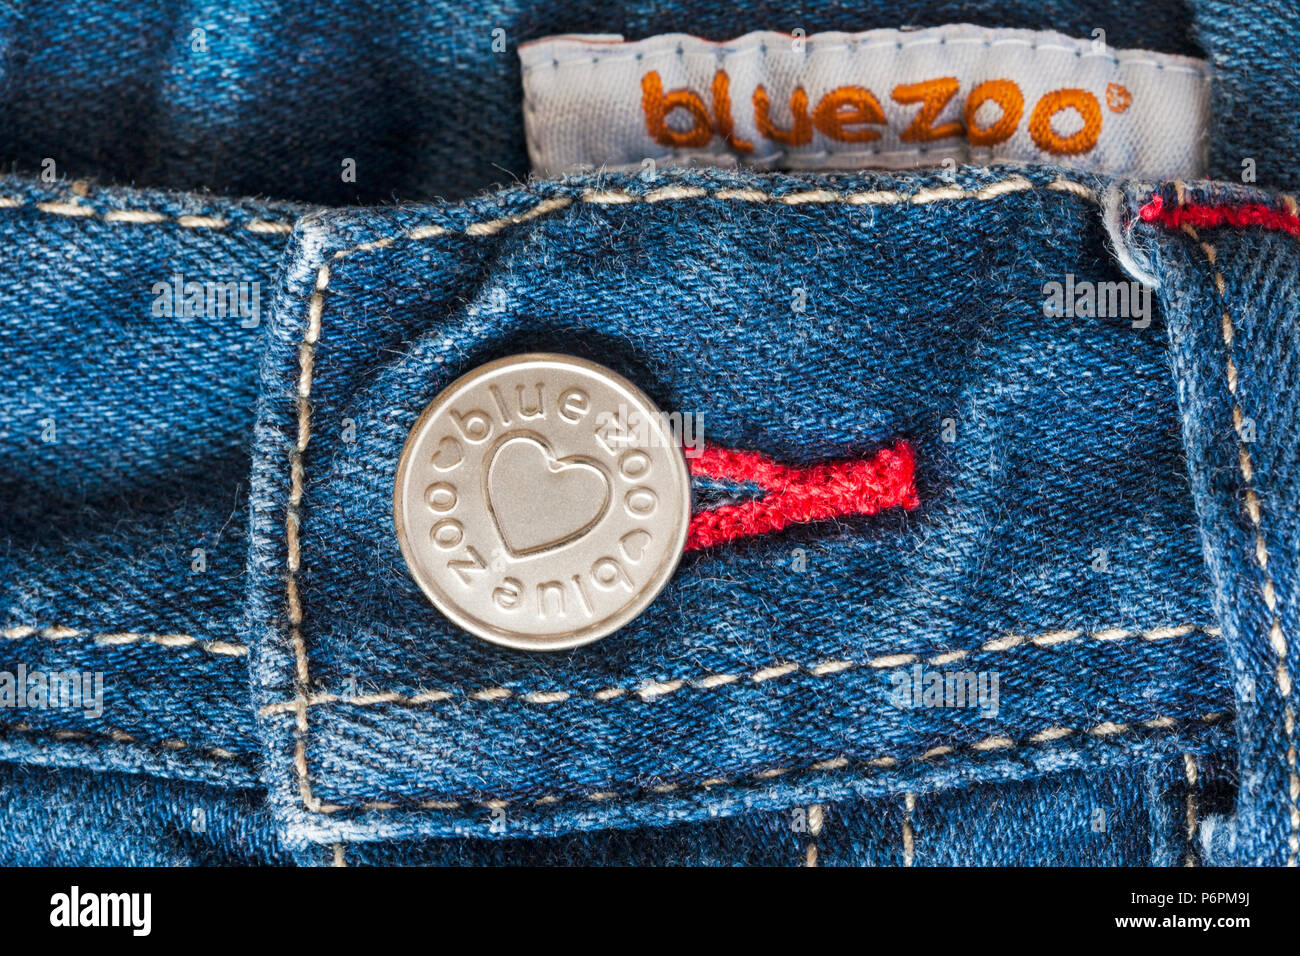 zoo button and blue zoo label denim jeans Photo - Alamy